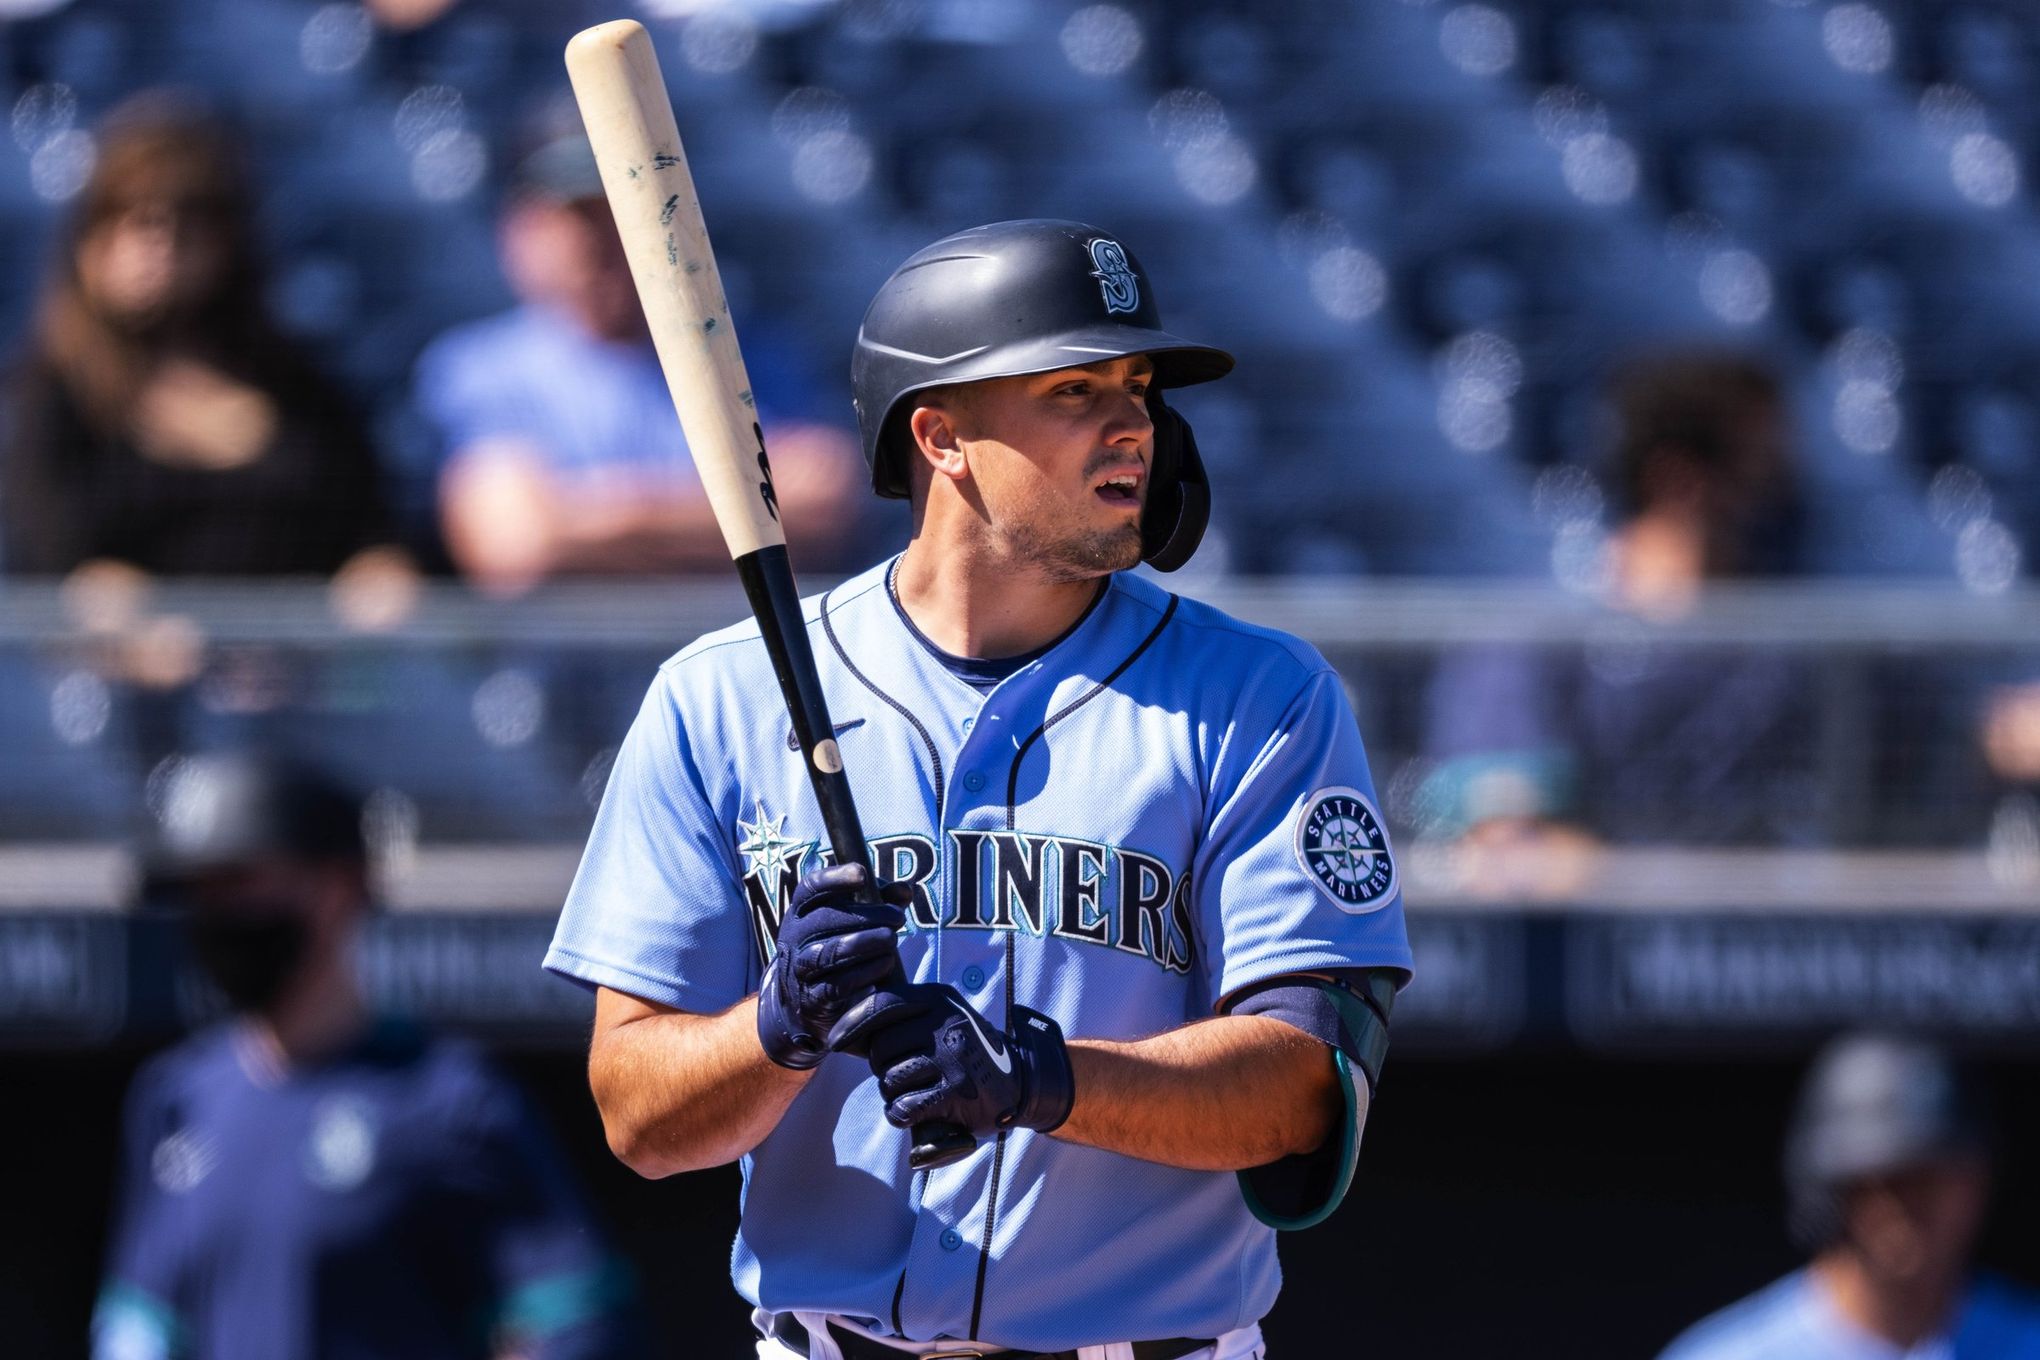 Mariners first baseman Evan White looks like 'the real deal